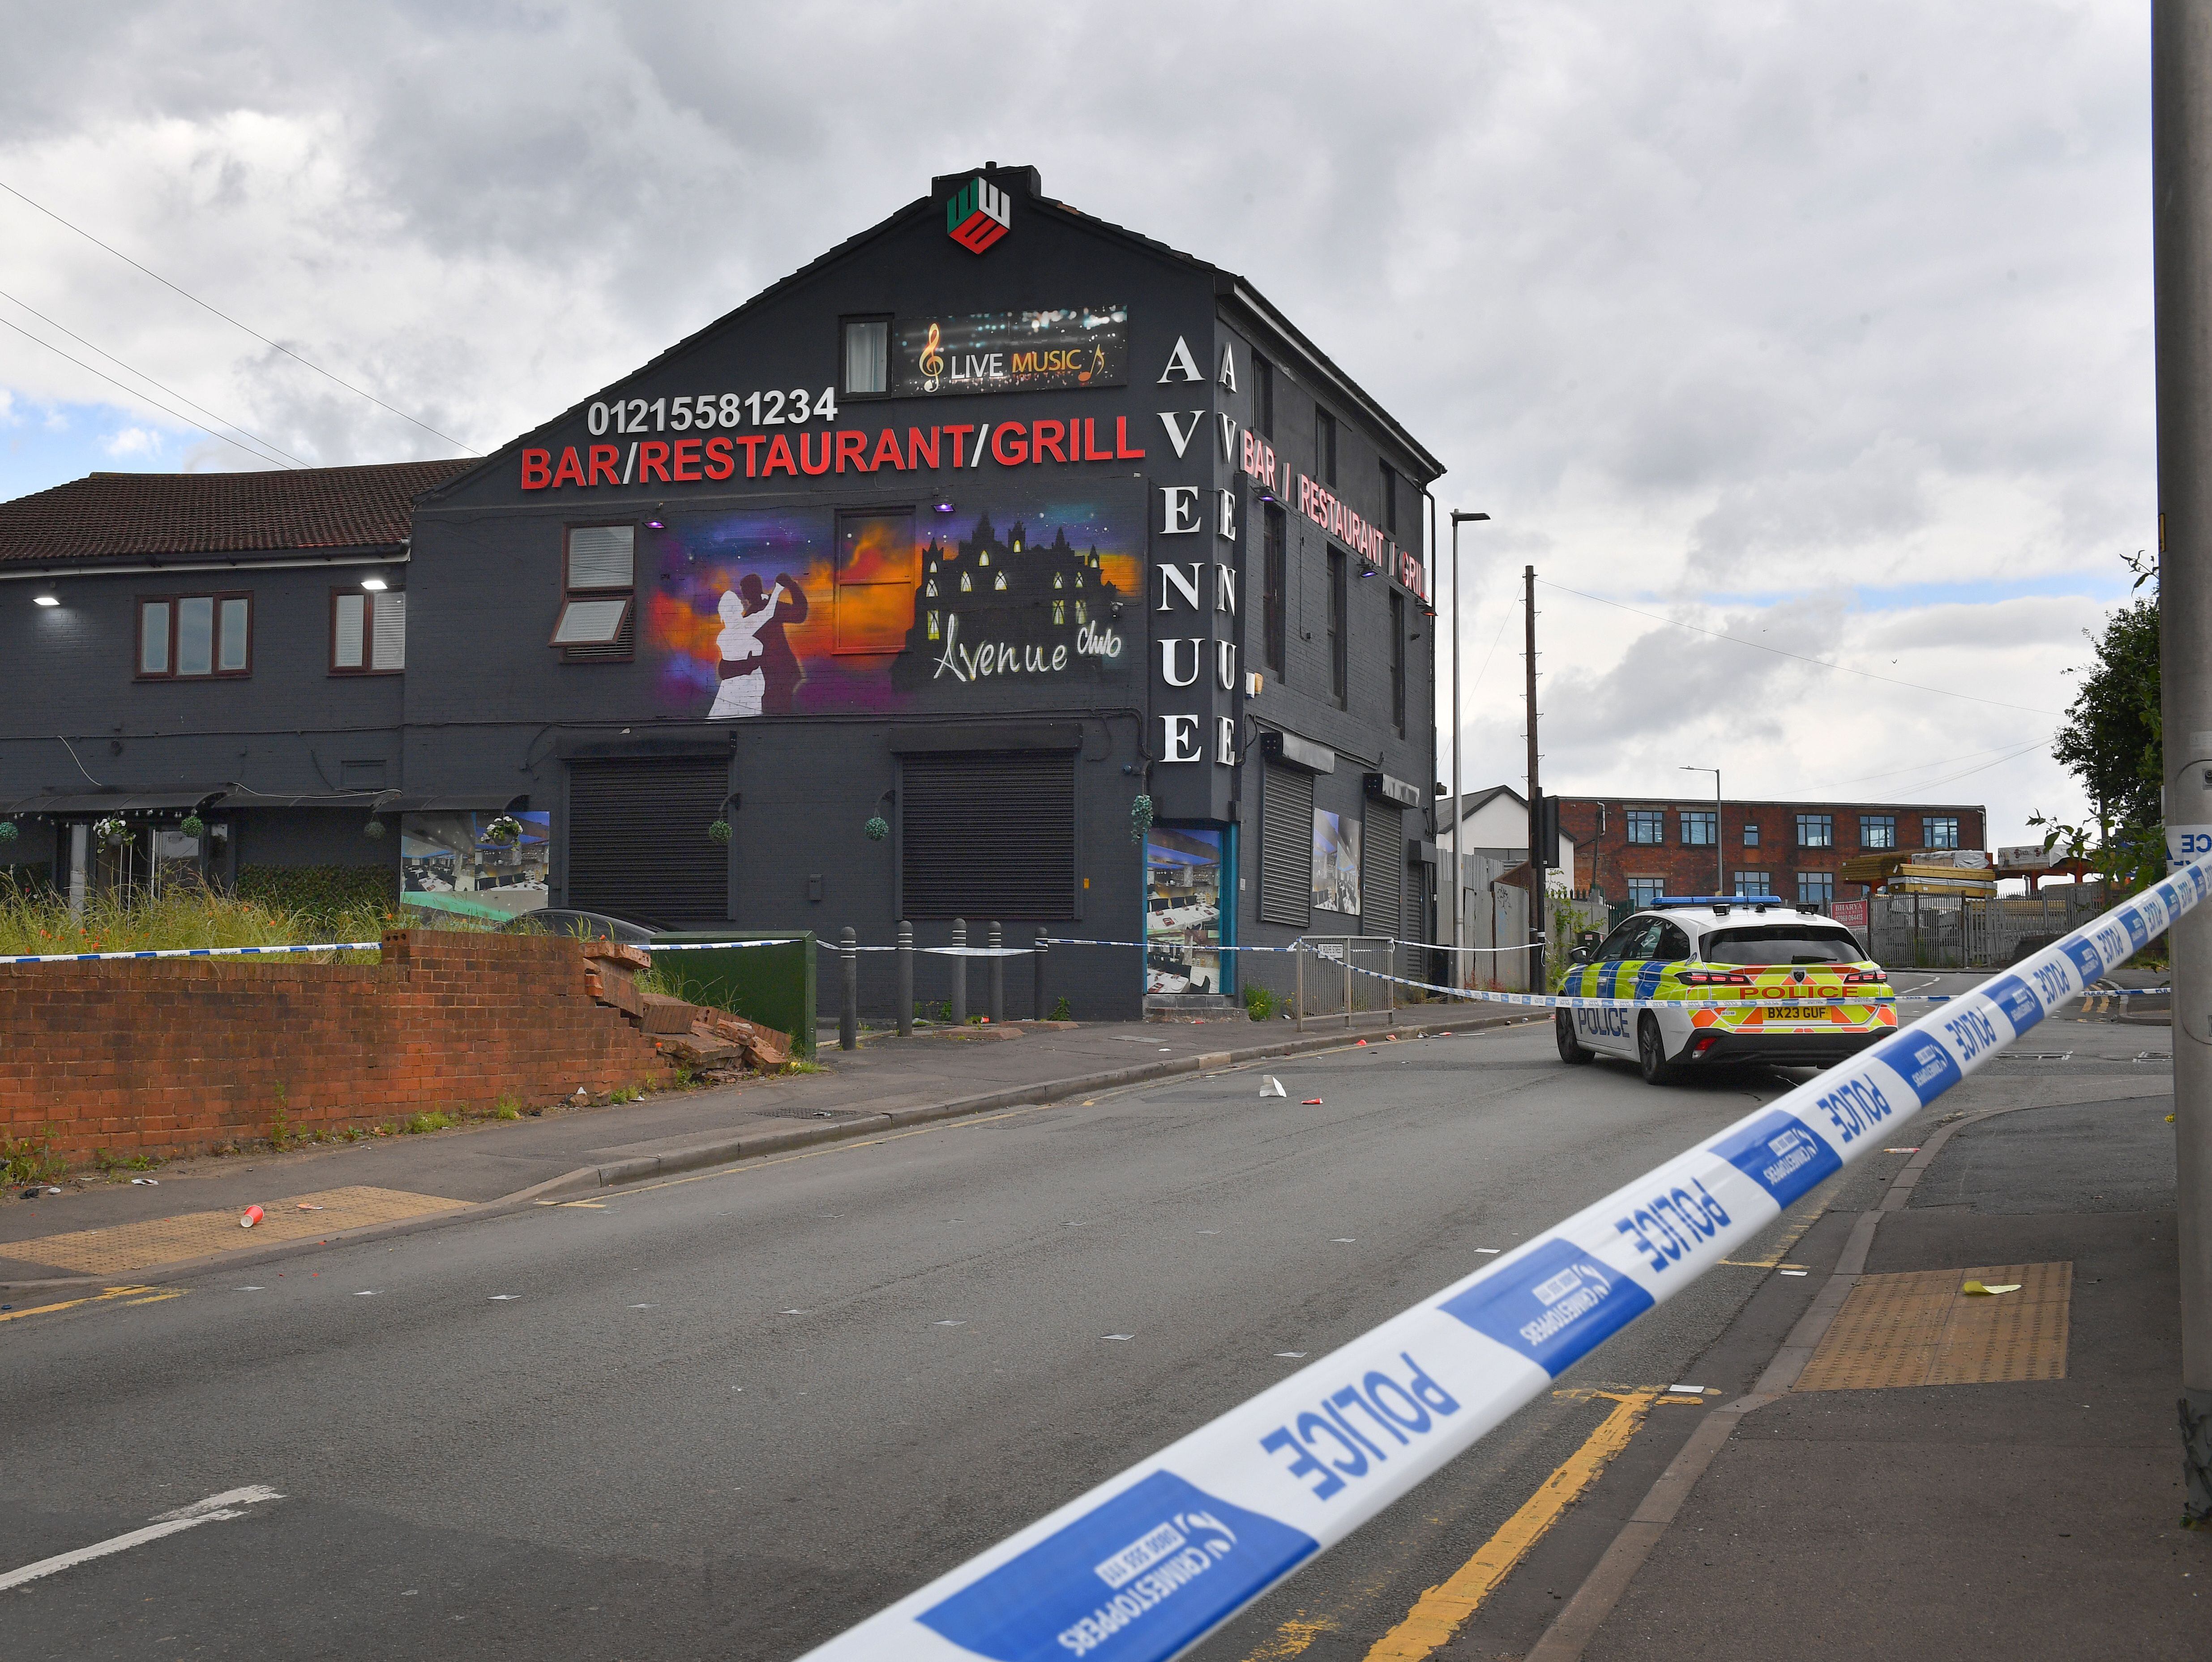 Police remain at scene of Smethwick shooting as investigation continues to find those responsible